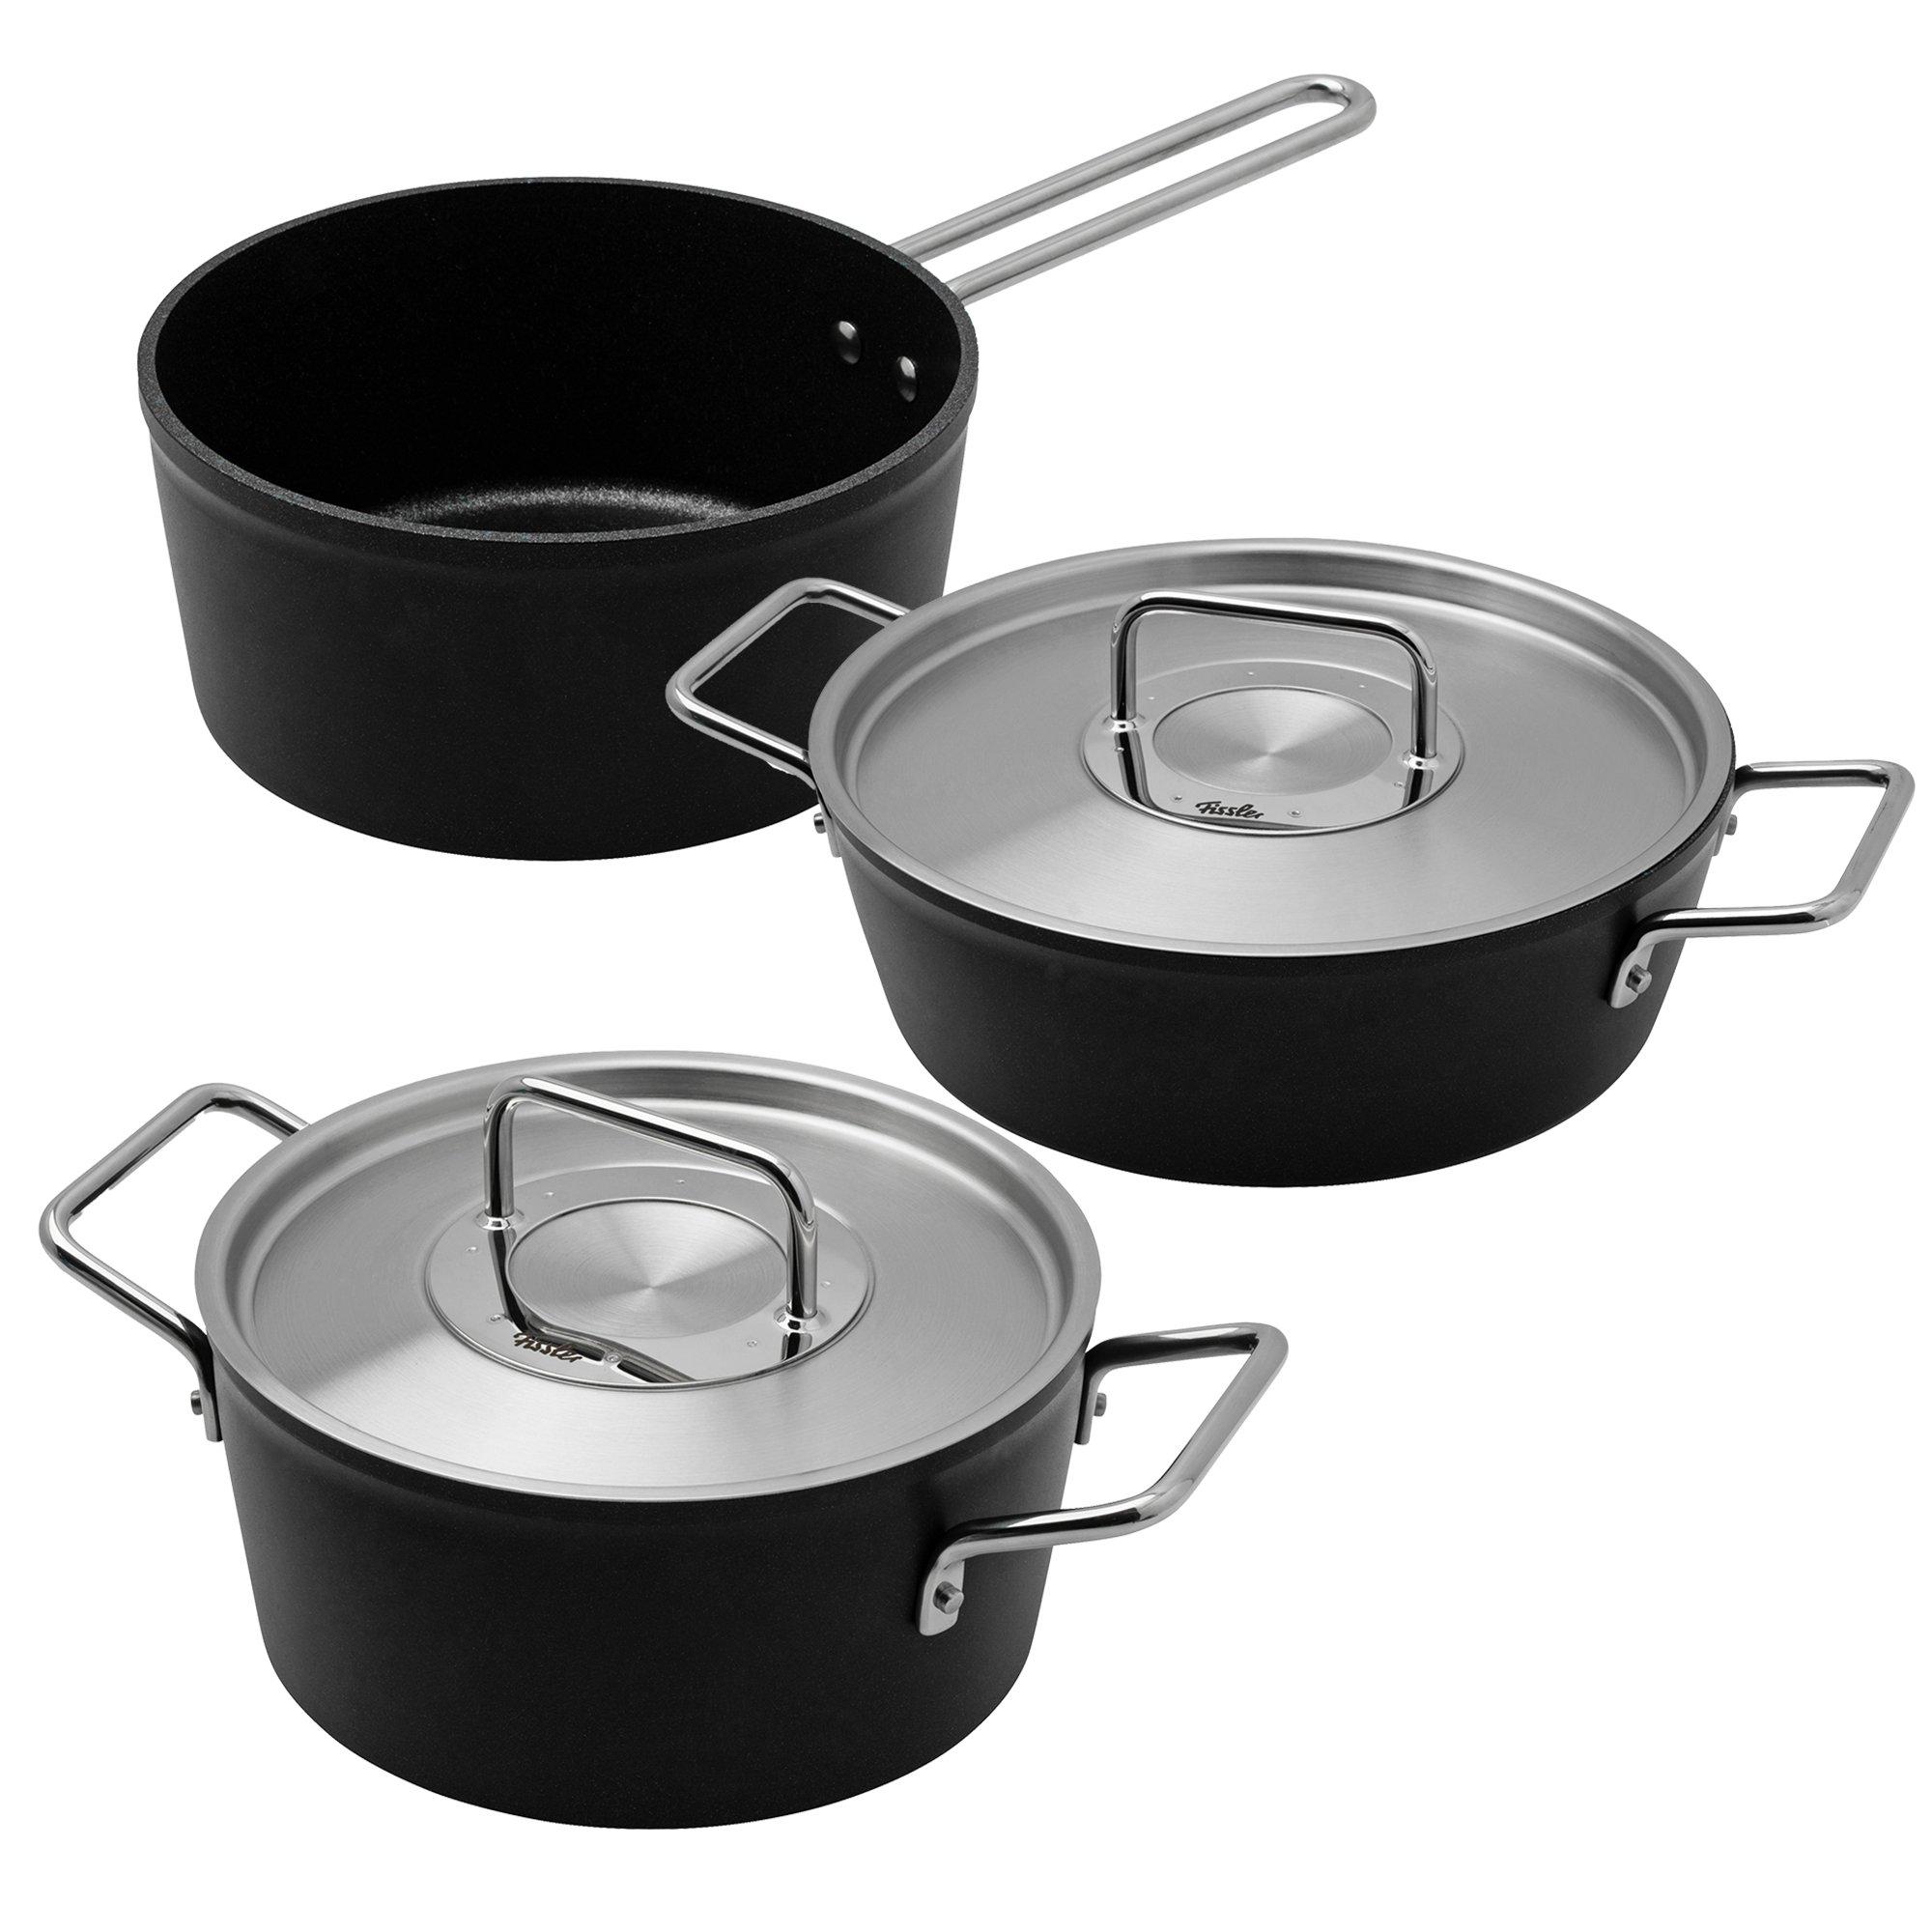 Fissler pans  All Fissler tested and in stock